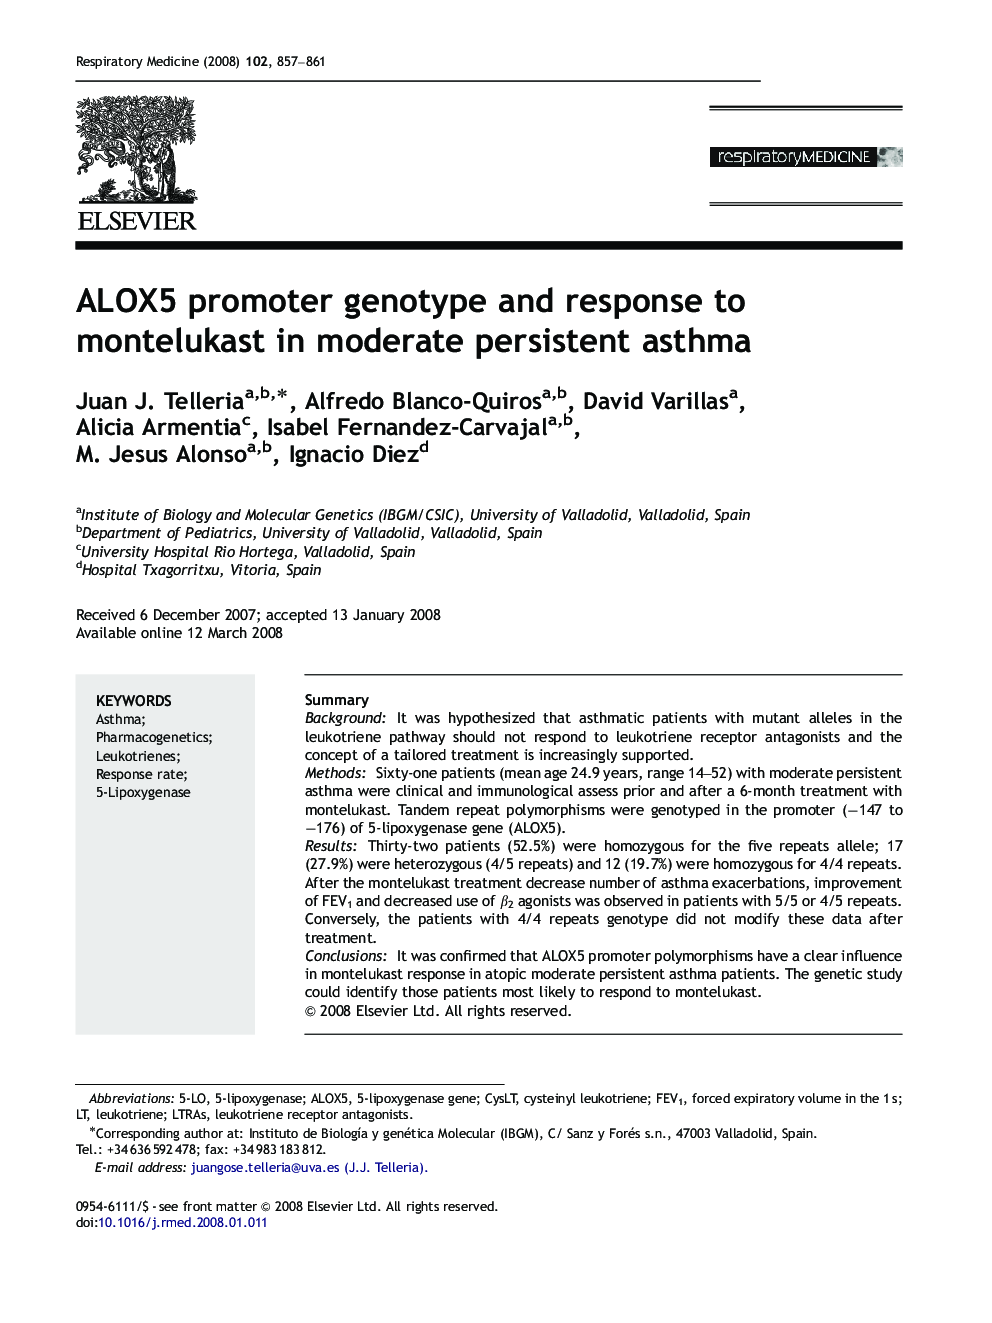 ALOX5 promoter genotype and response to montelukast in moderate persistent asthma